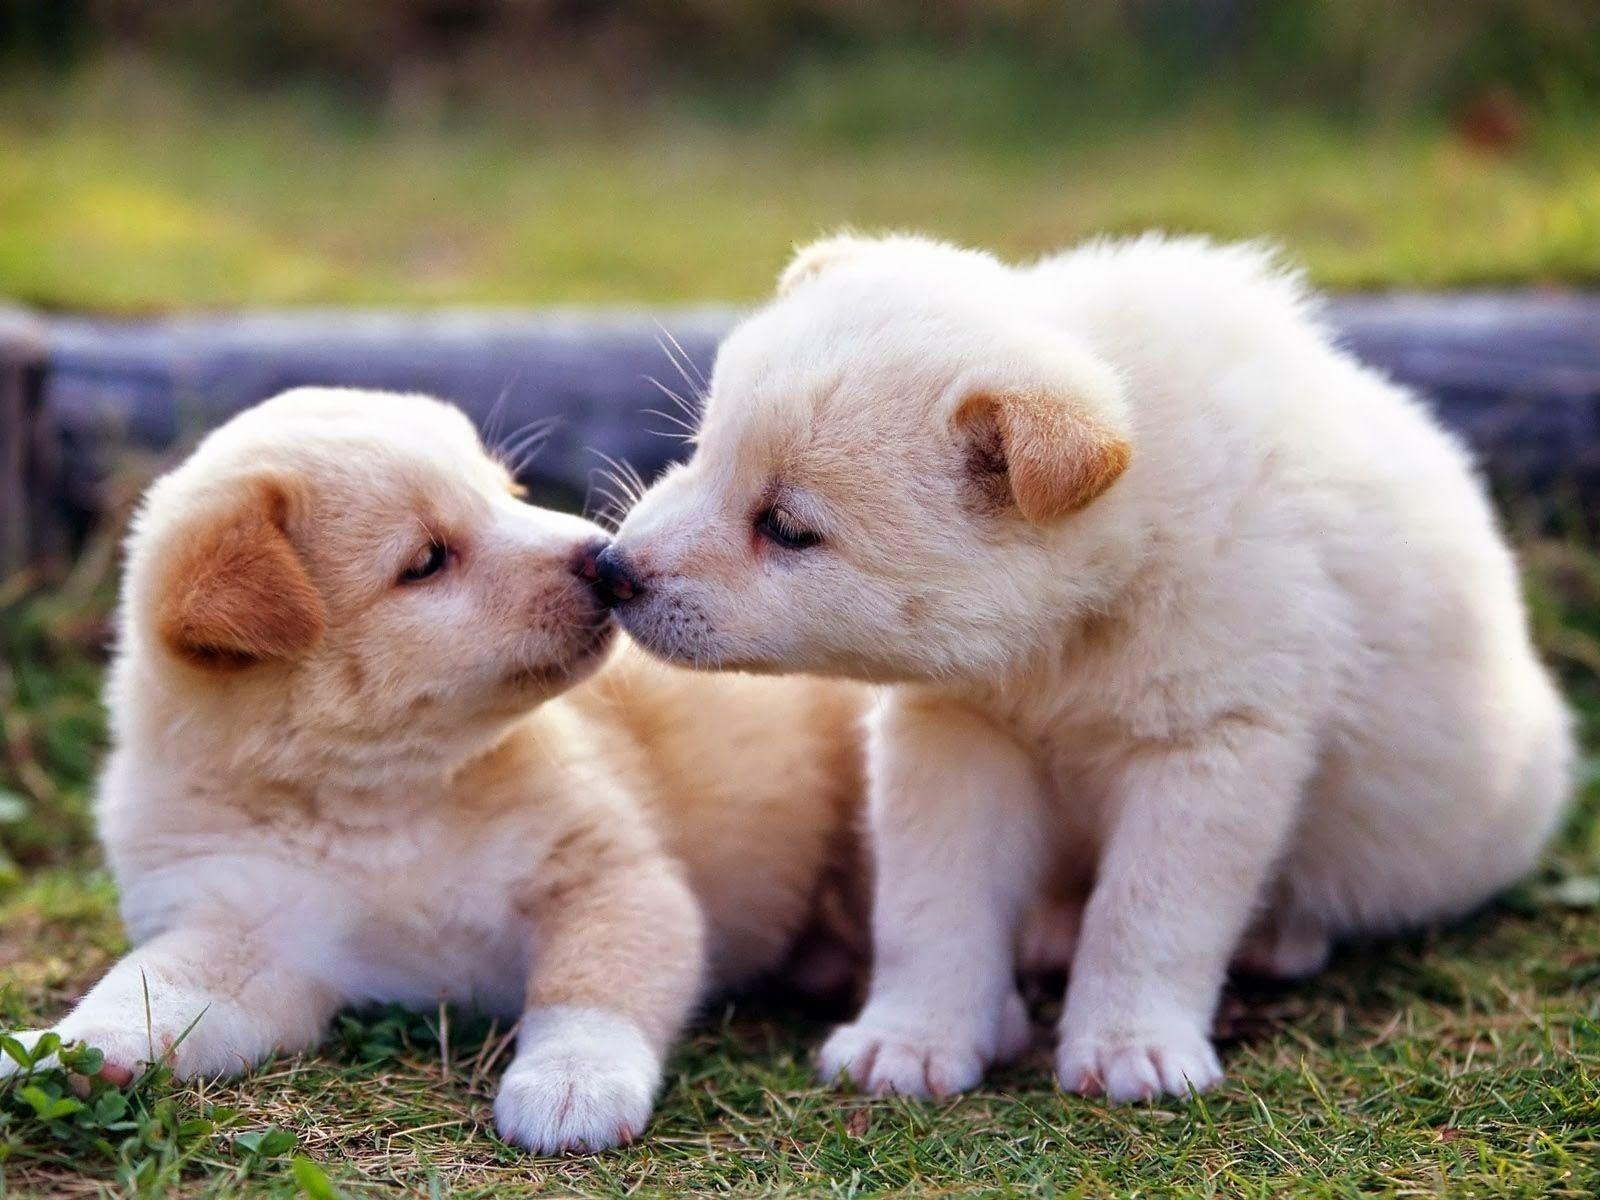 Puppies Kissing!. Cute dogs breeds, Cute puppies, Baby animals